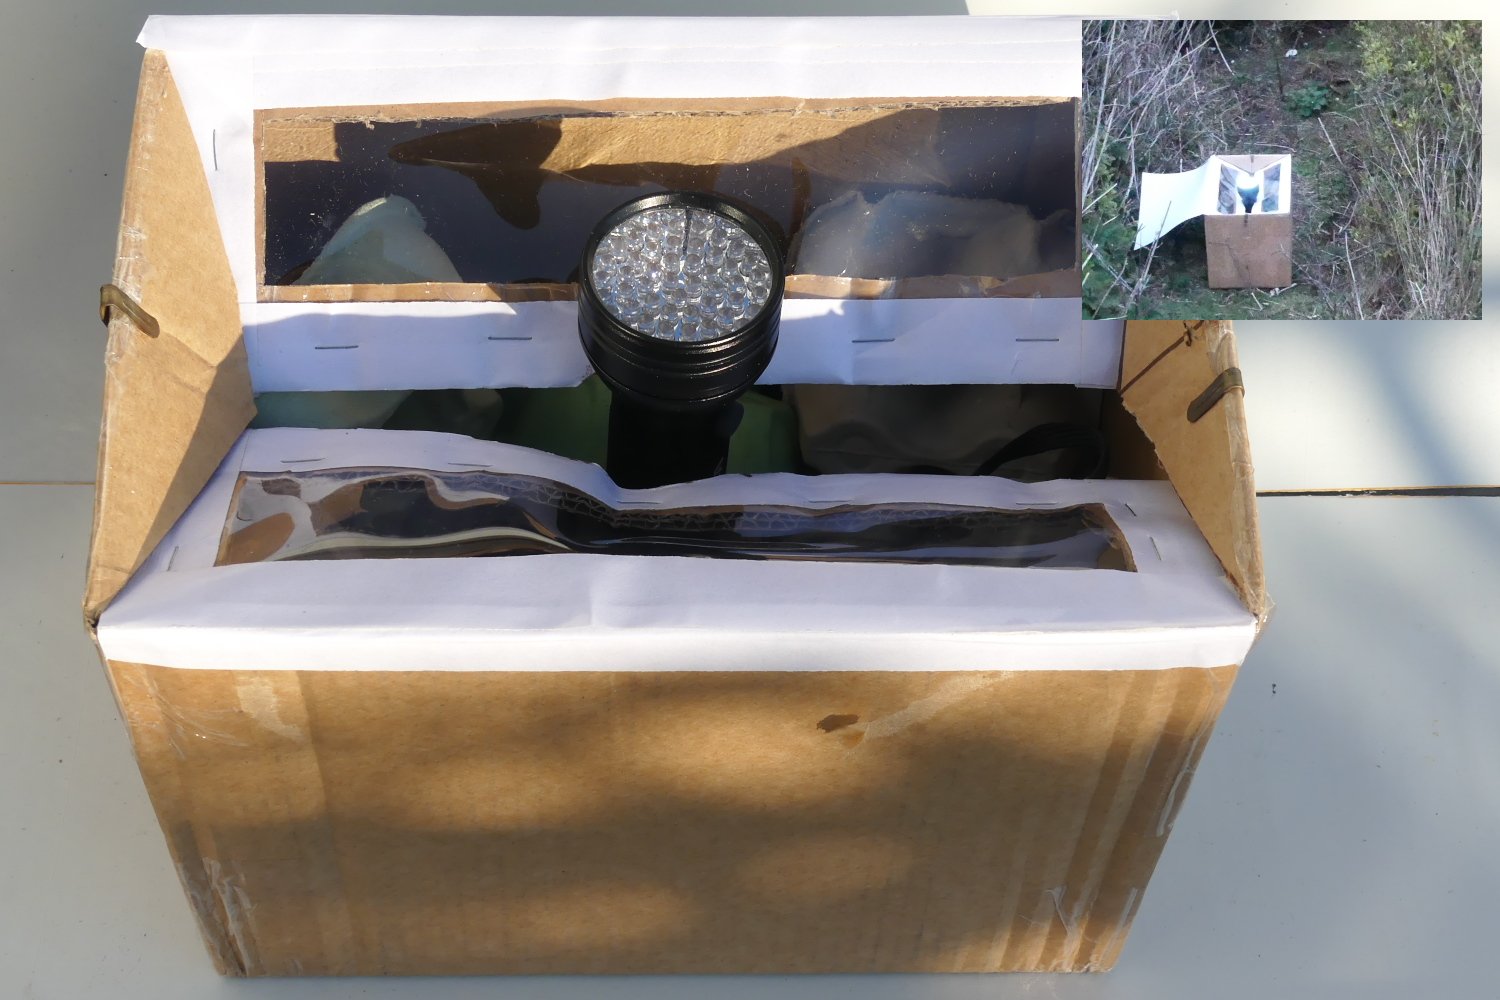 A cardboard box, the lid folded in on itself, wedging in a high-powered UV LED torch, with openings for species to enter, and clear-covered cutout areas to view from